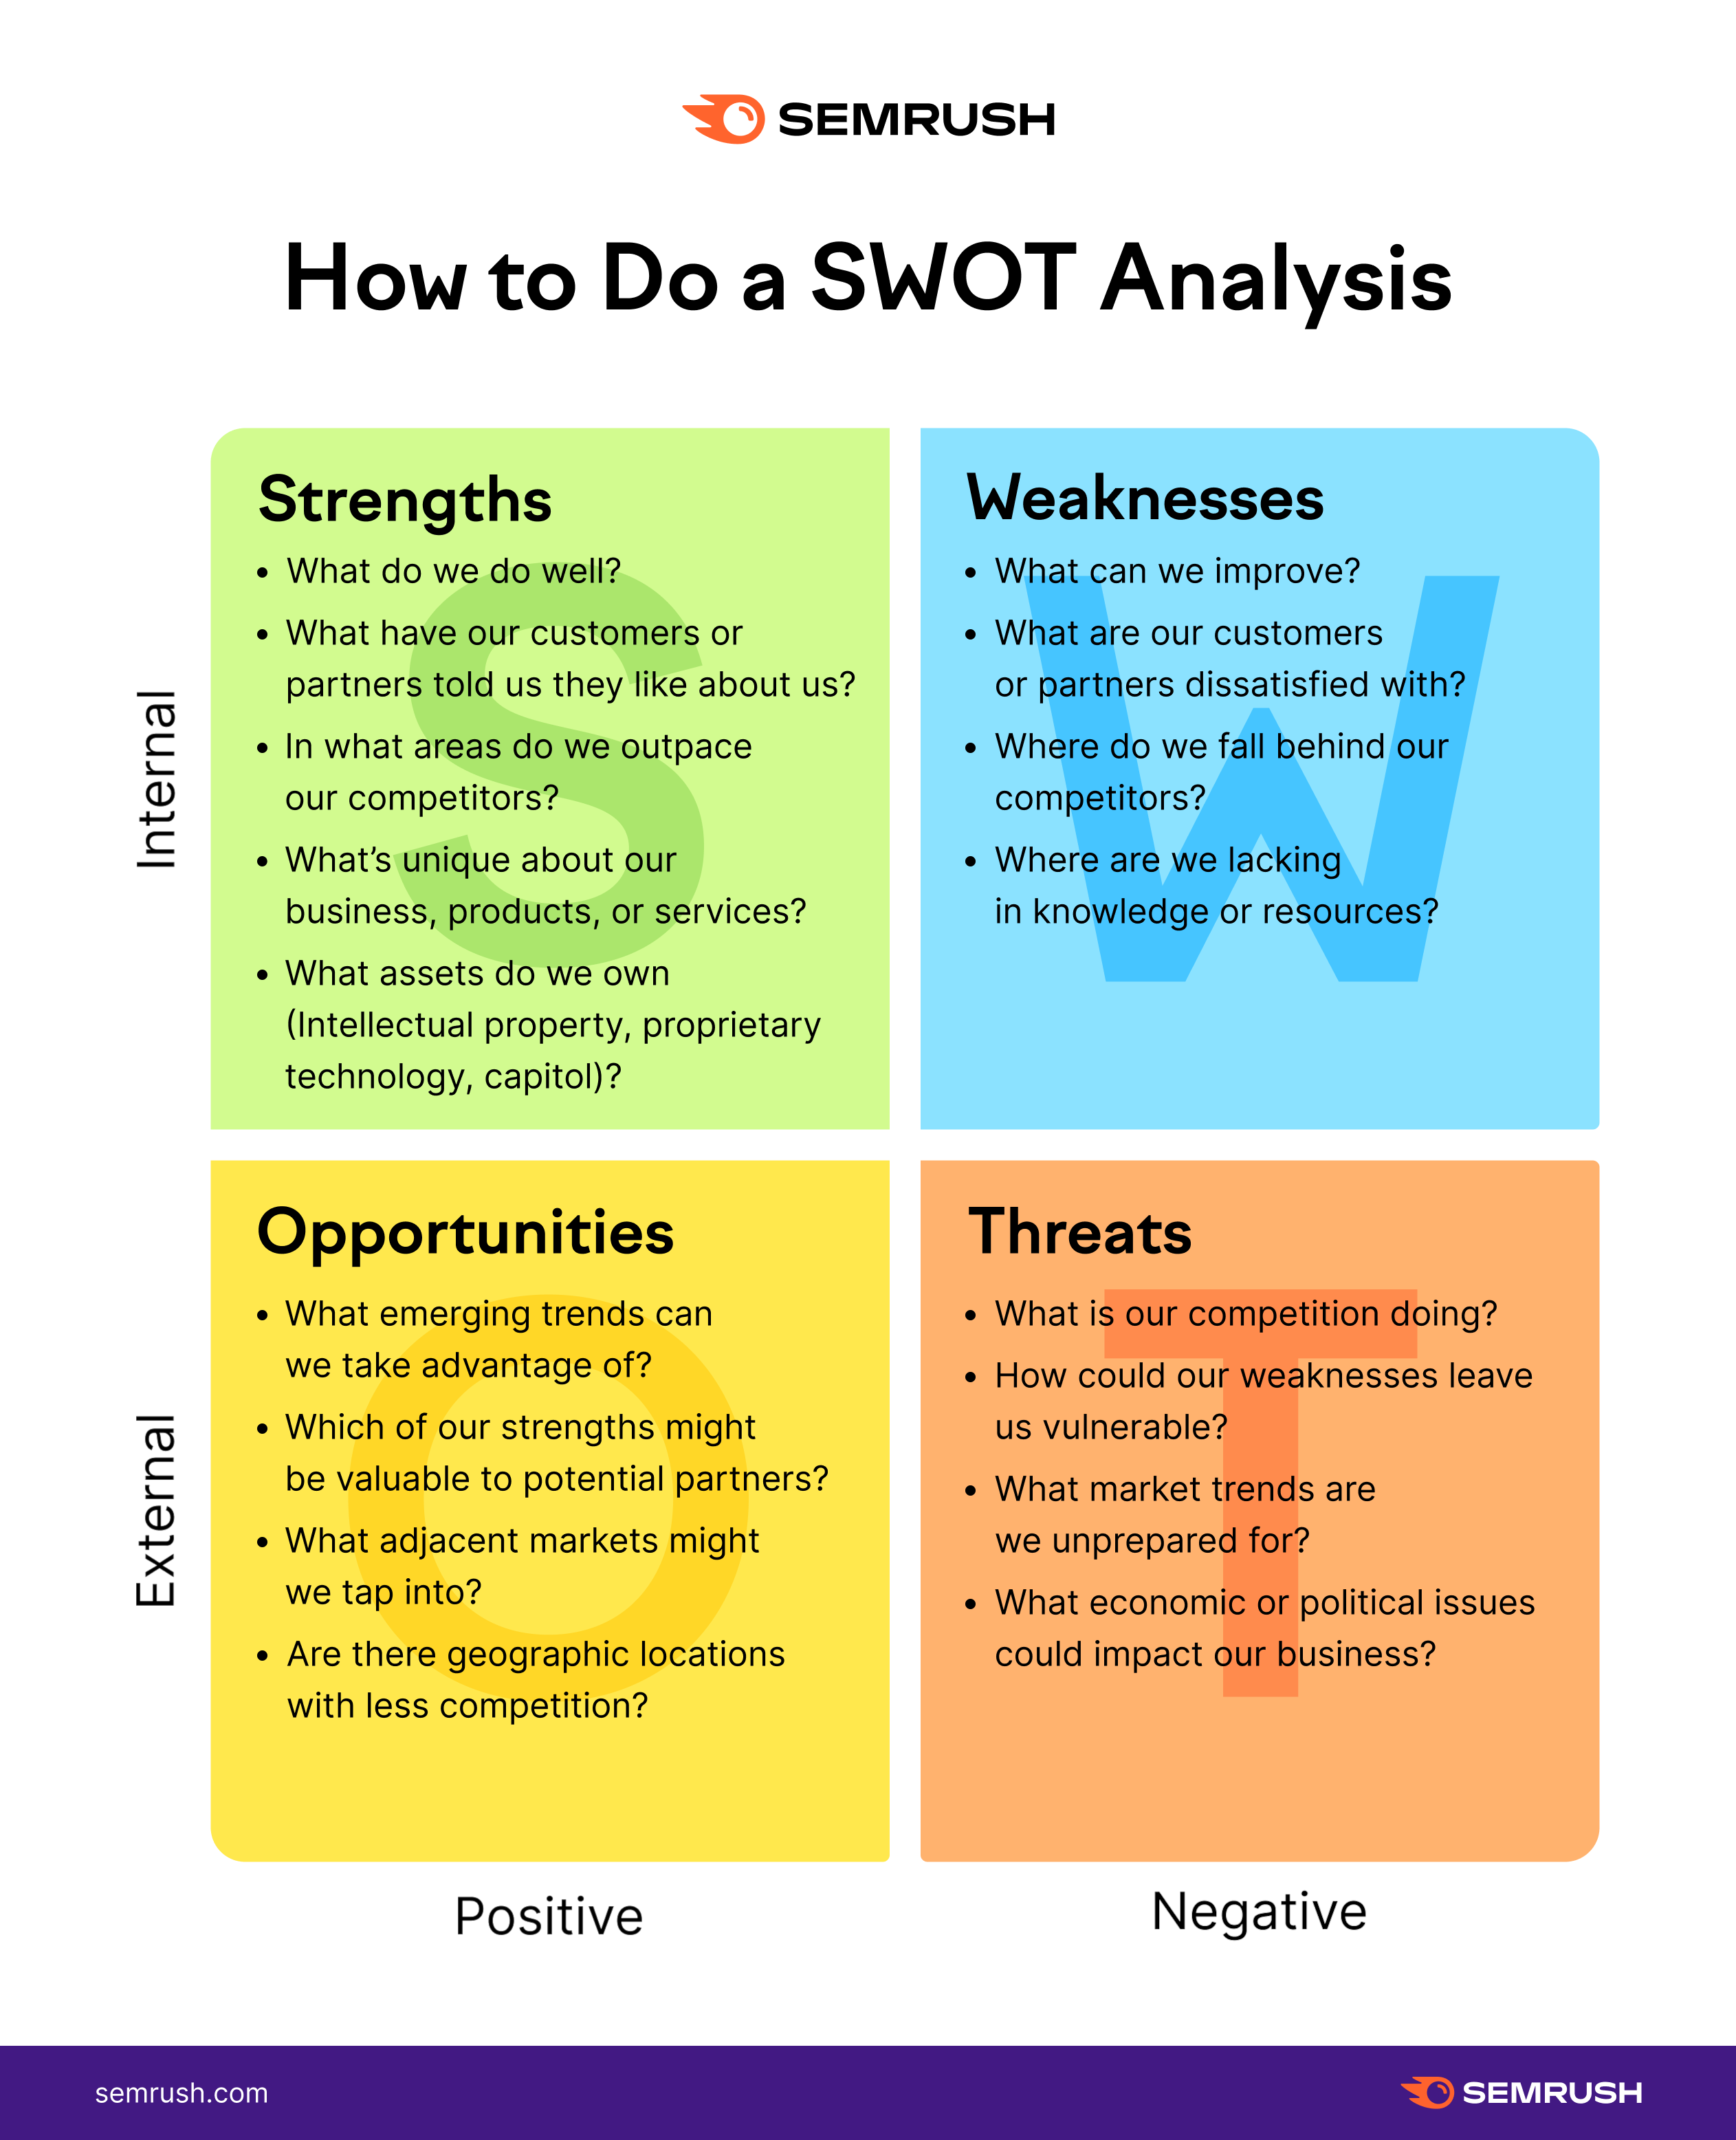 How To Do a SWOT Analysis (3 Examples & Free Template)